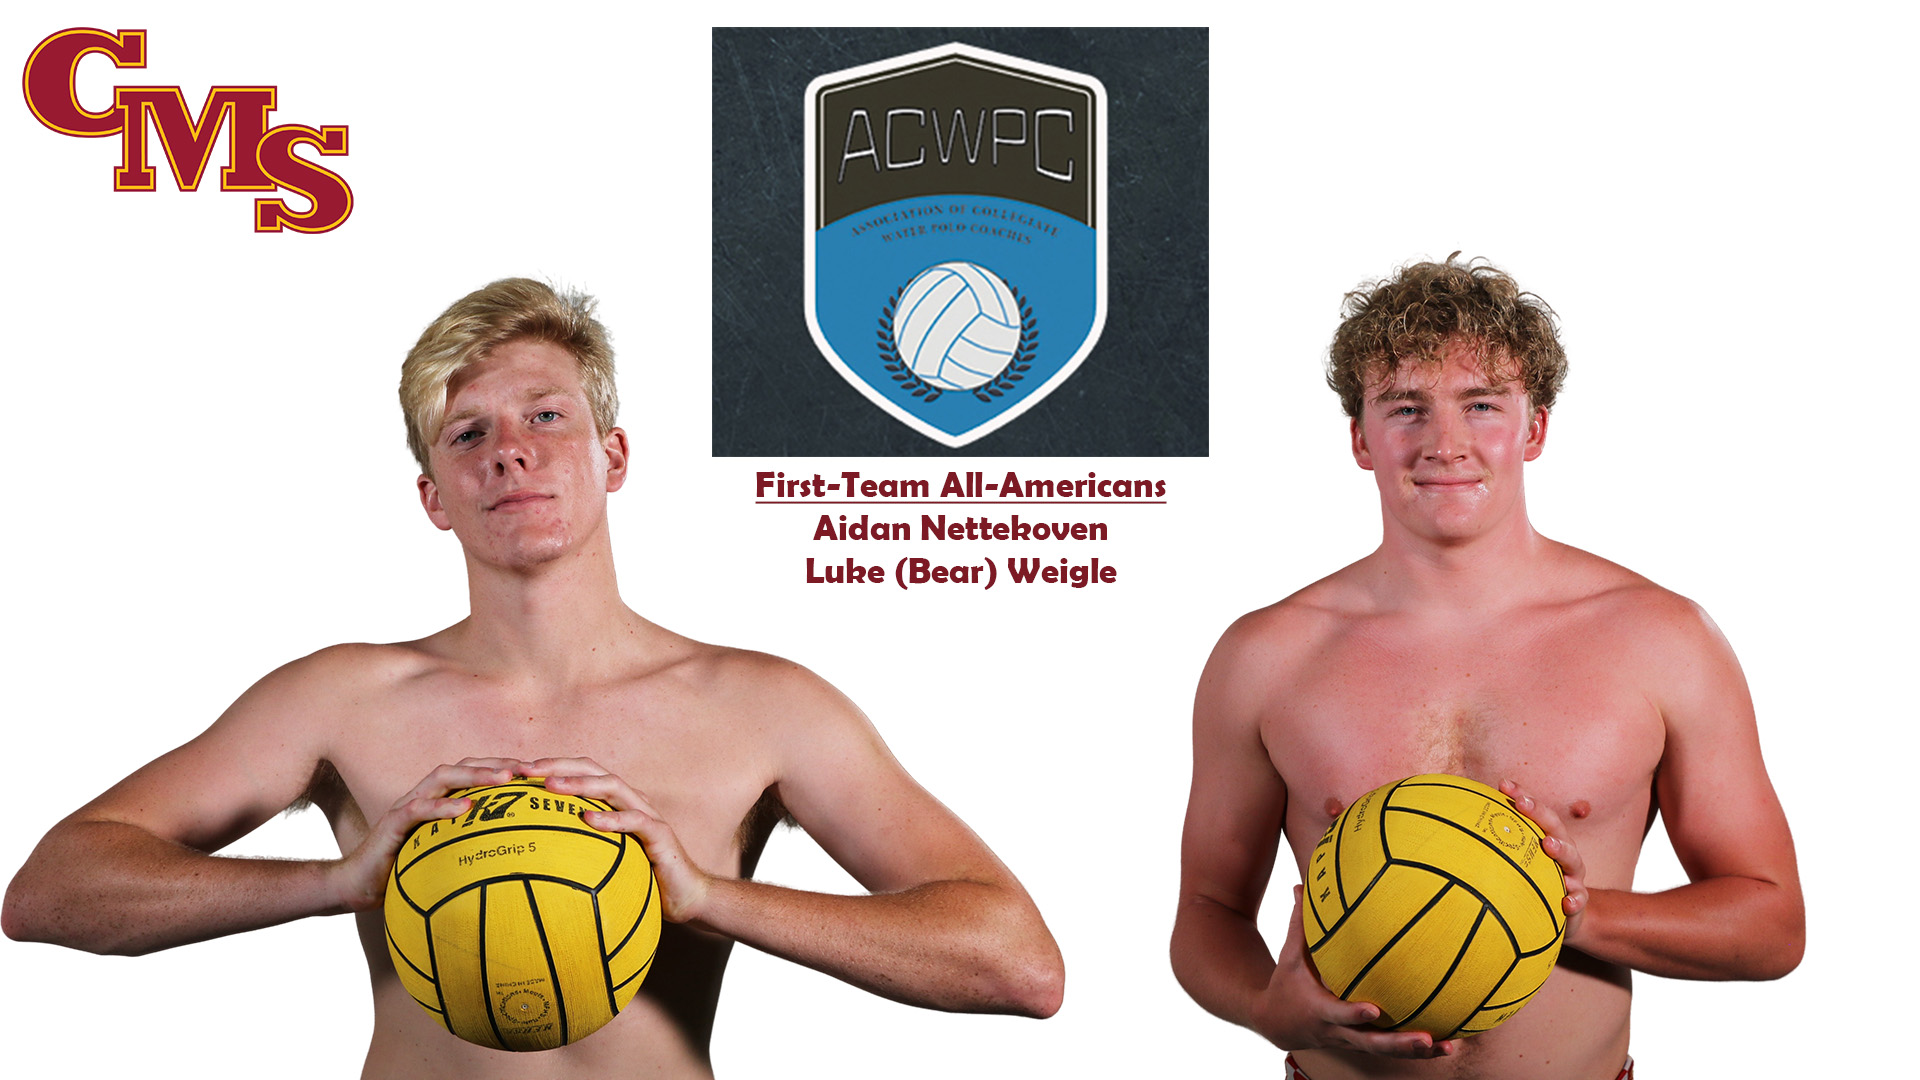 Posed shots of Aidan Nettekoven and Luke (Bear) Weigle with the ACWPC logo